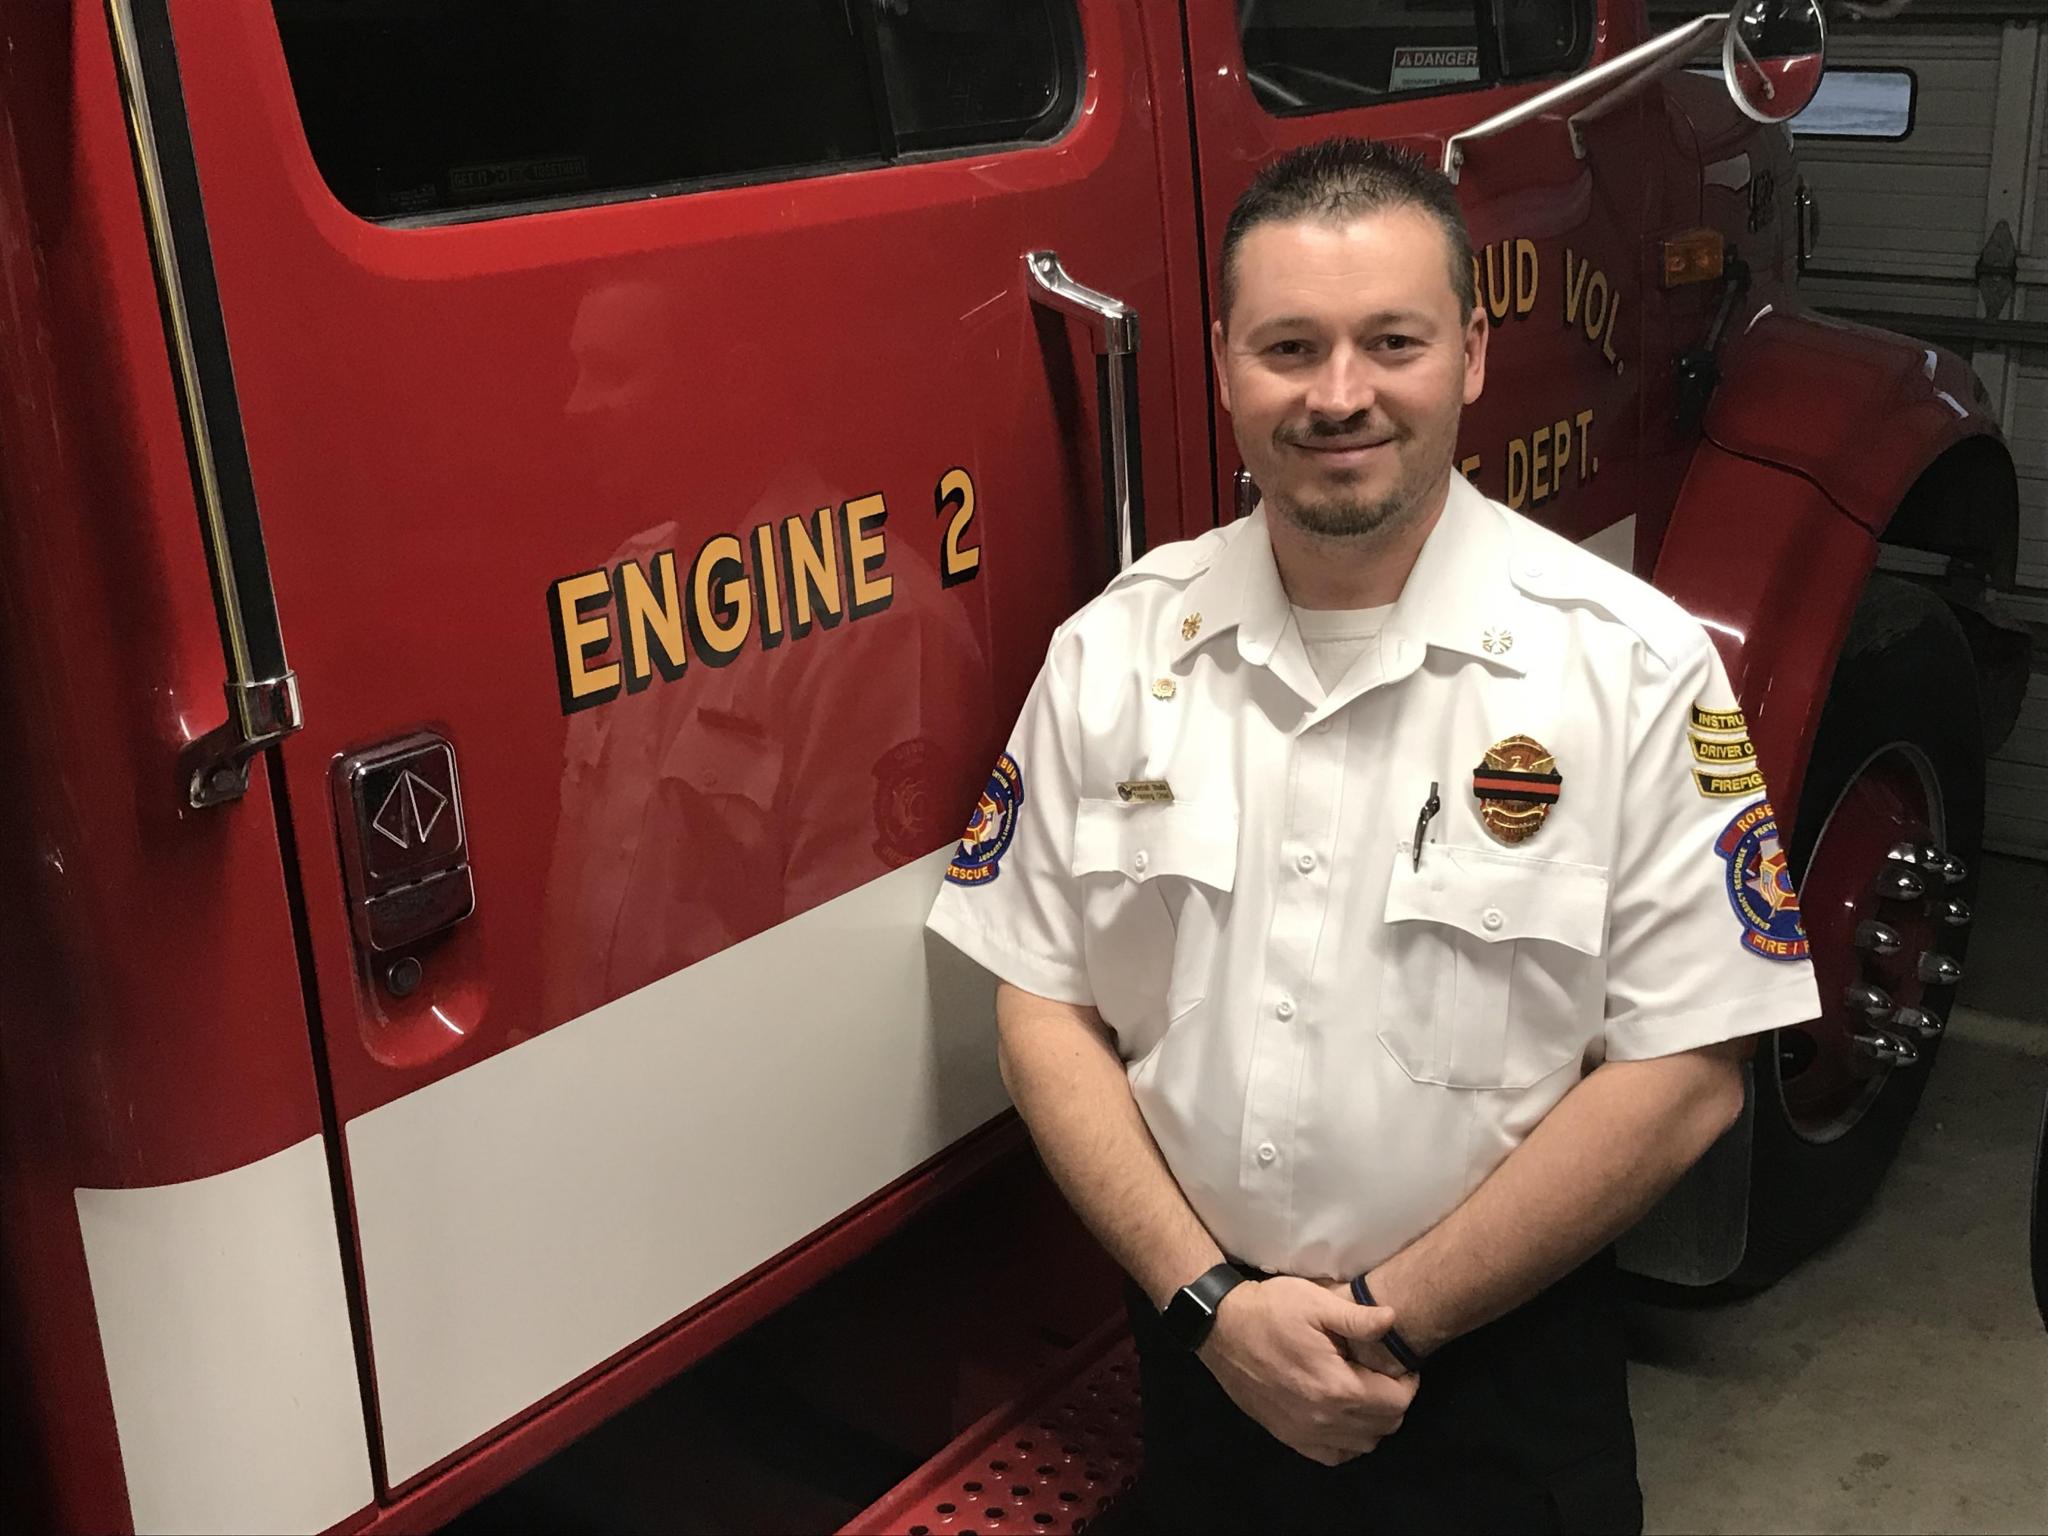 Rosebud firefighter and EMT Jay Shults was honored for his quick actions recently.